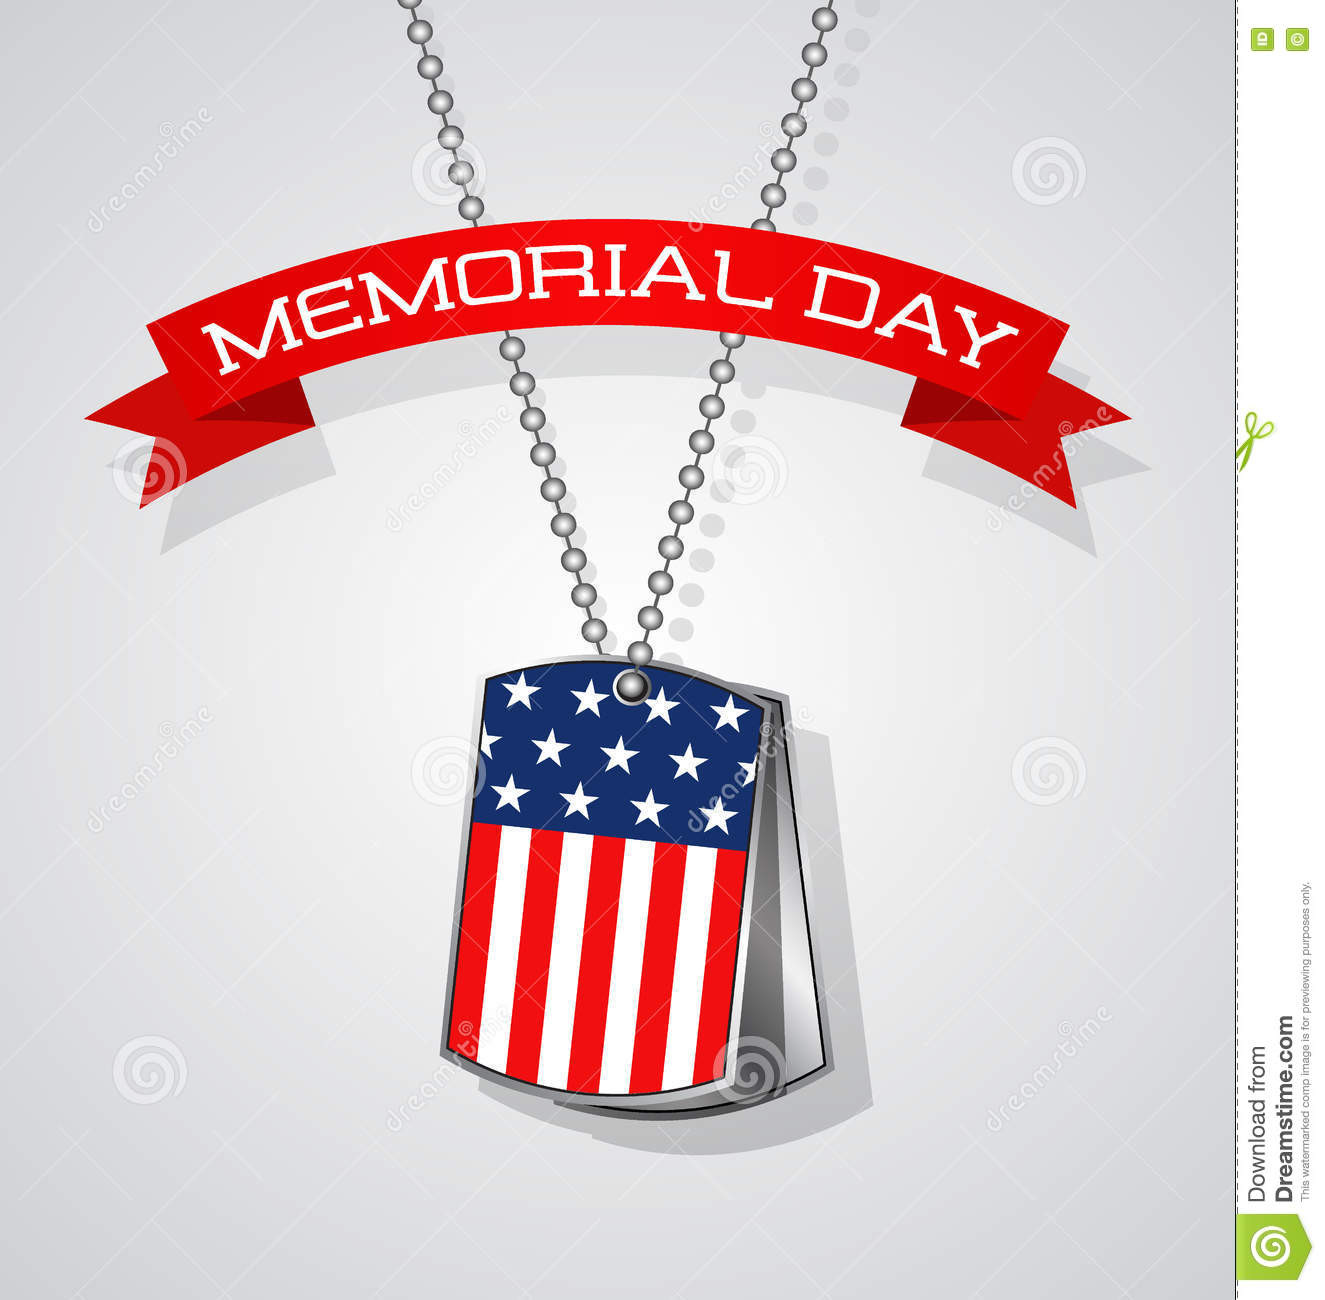 Memorial Day Design
 Memorial Day Banner Design With Sol r Dog Tags And Flag